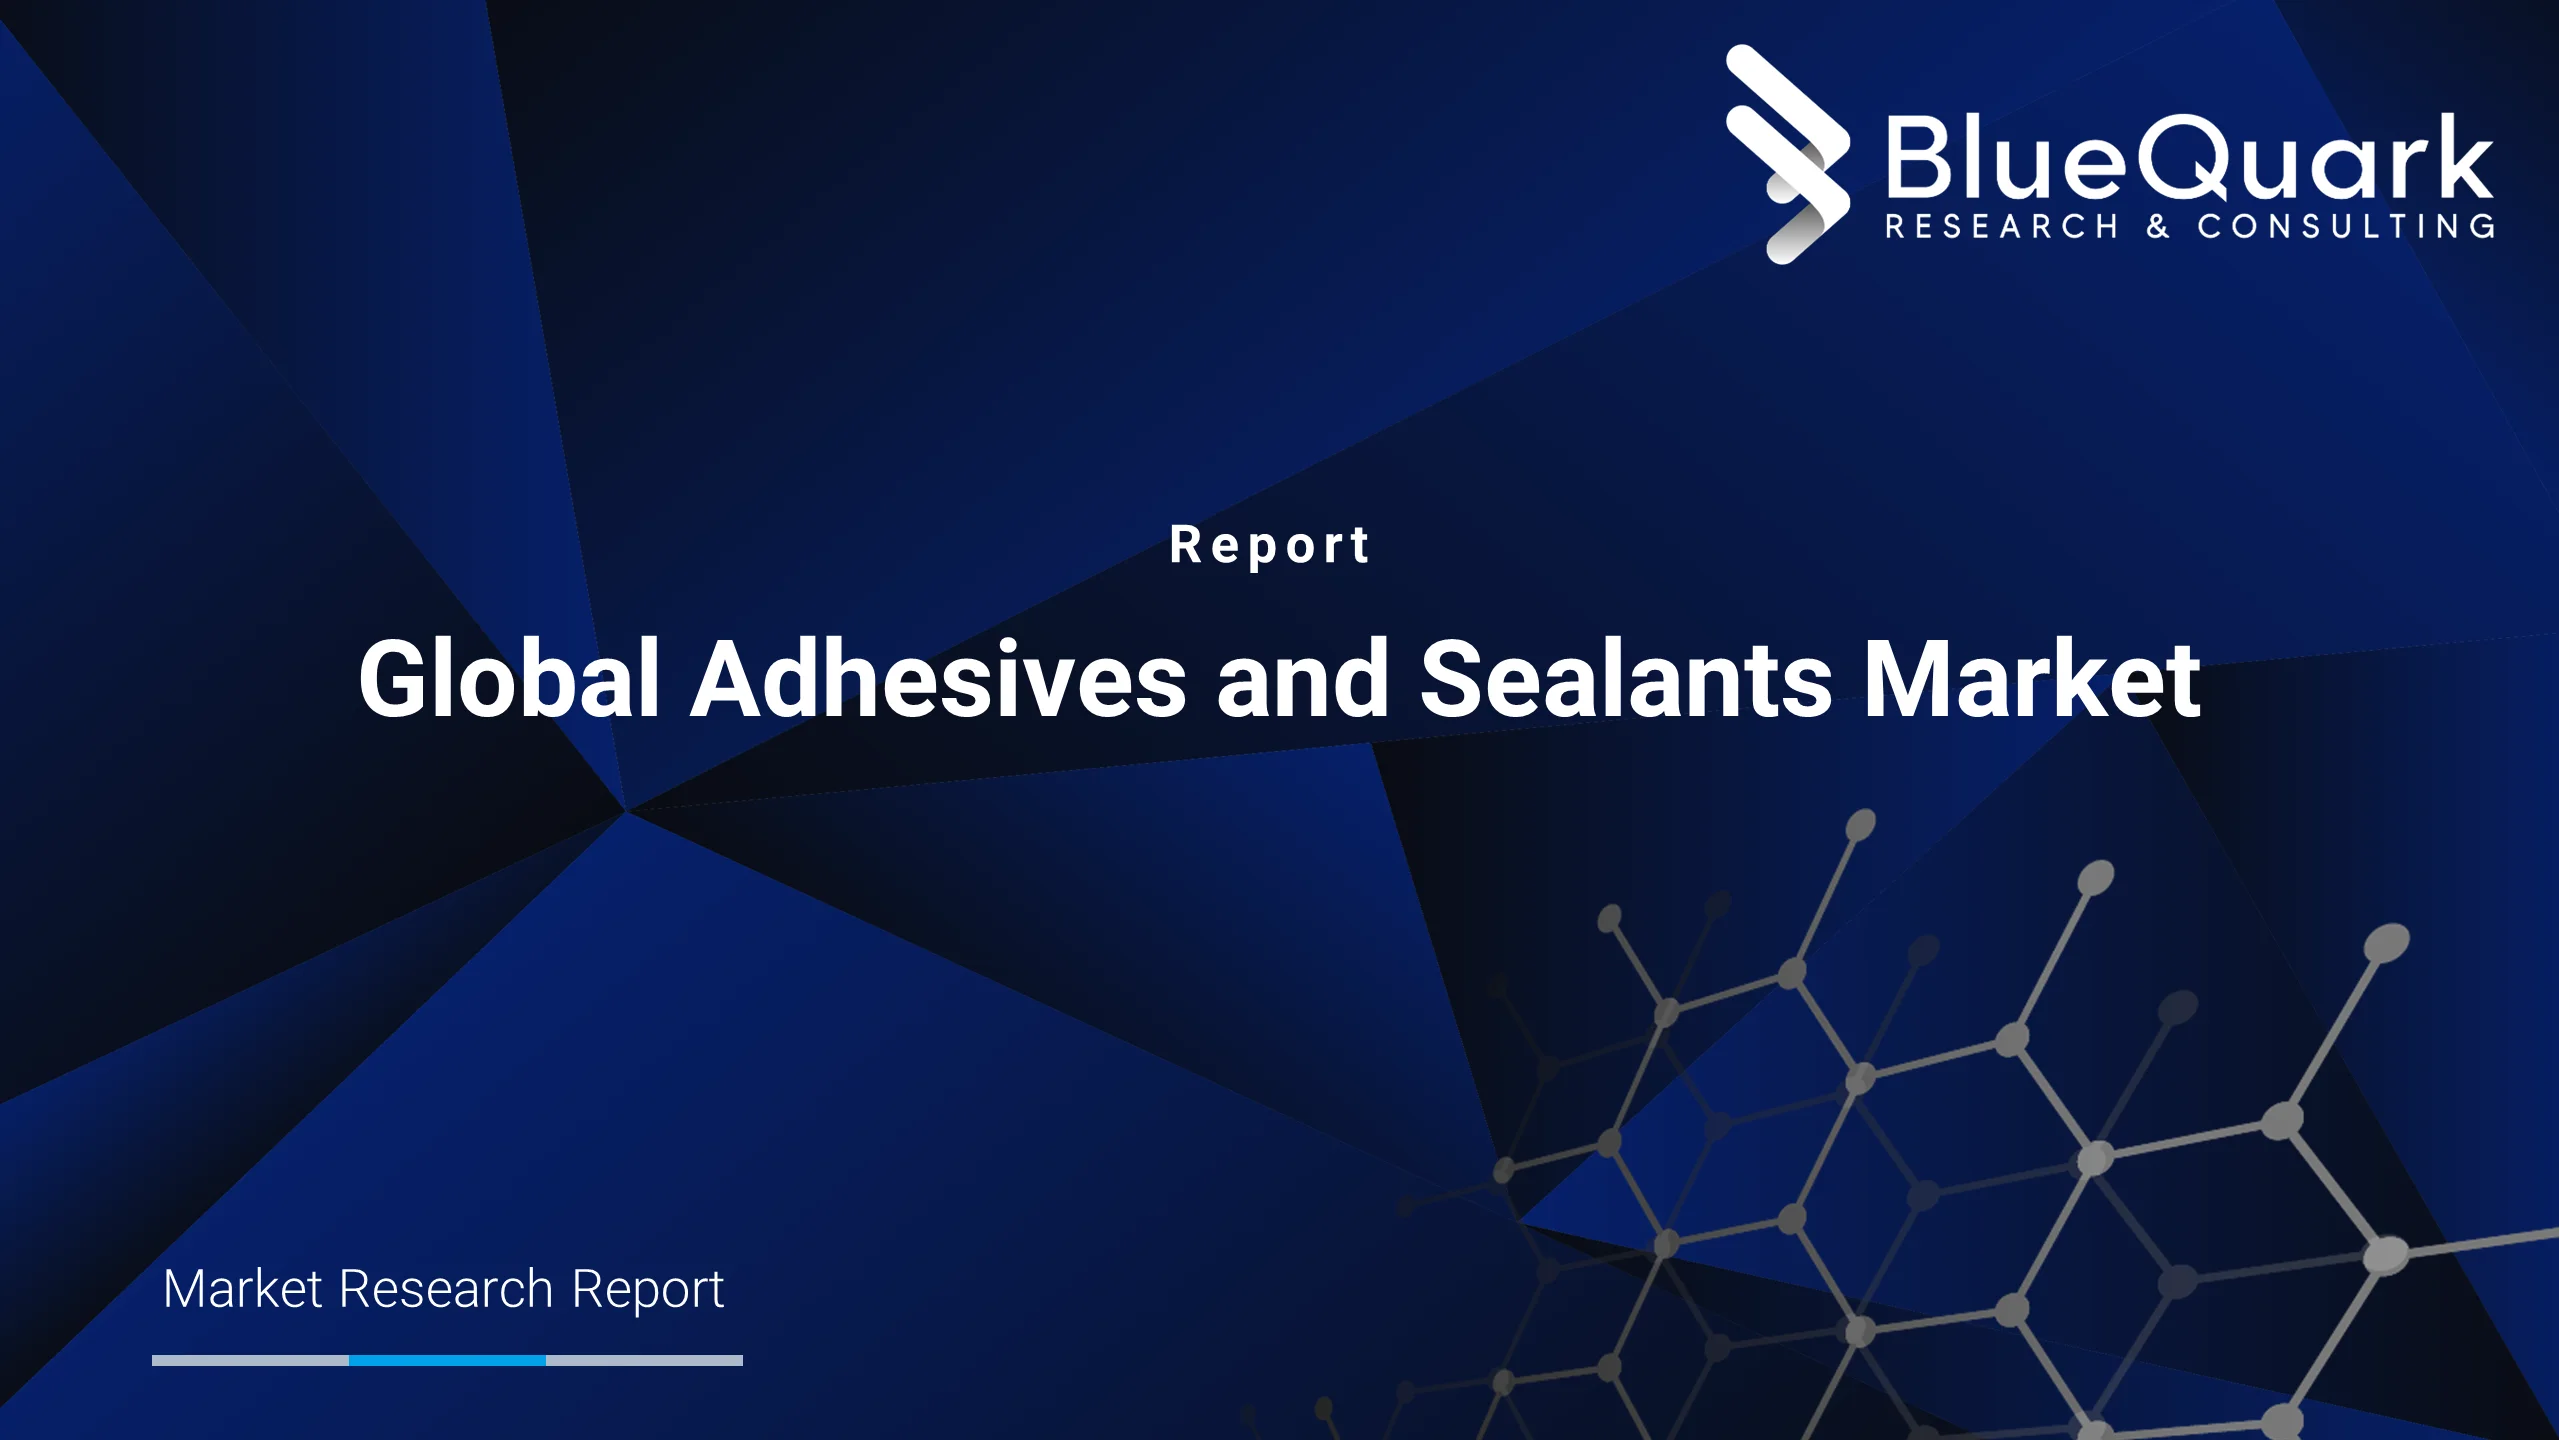 Global Adhesives and Sealants Market Outlook to 2029